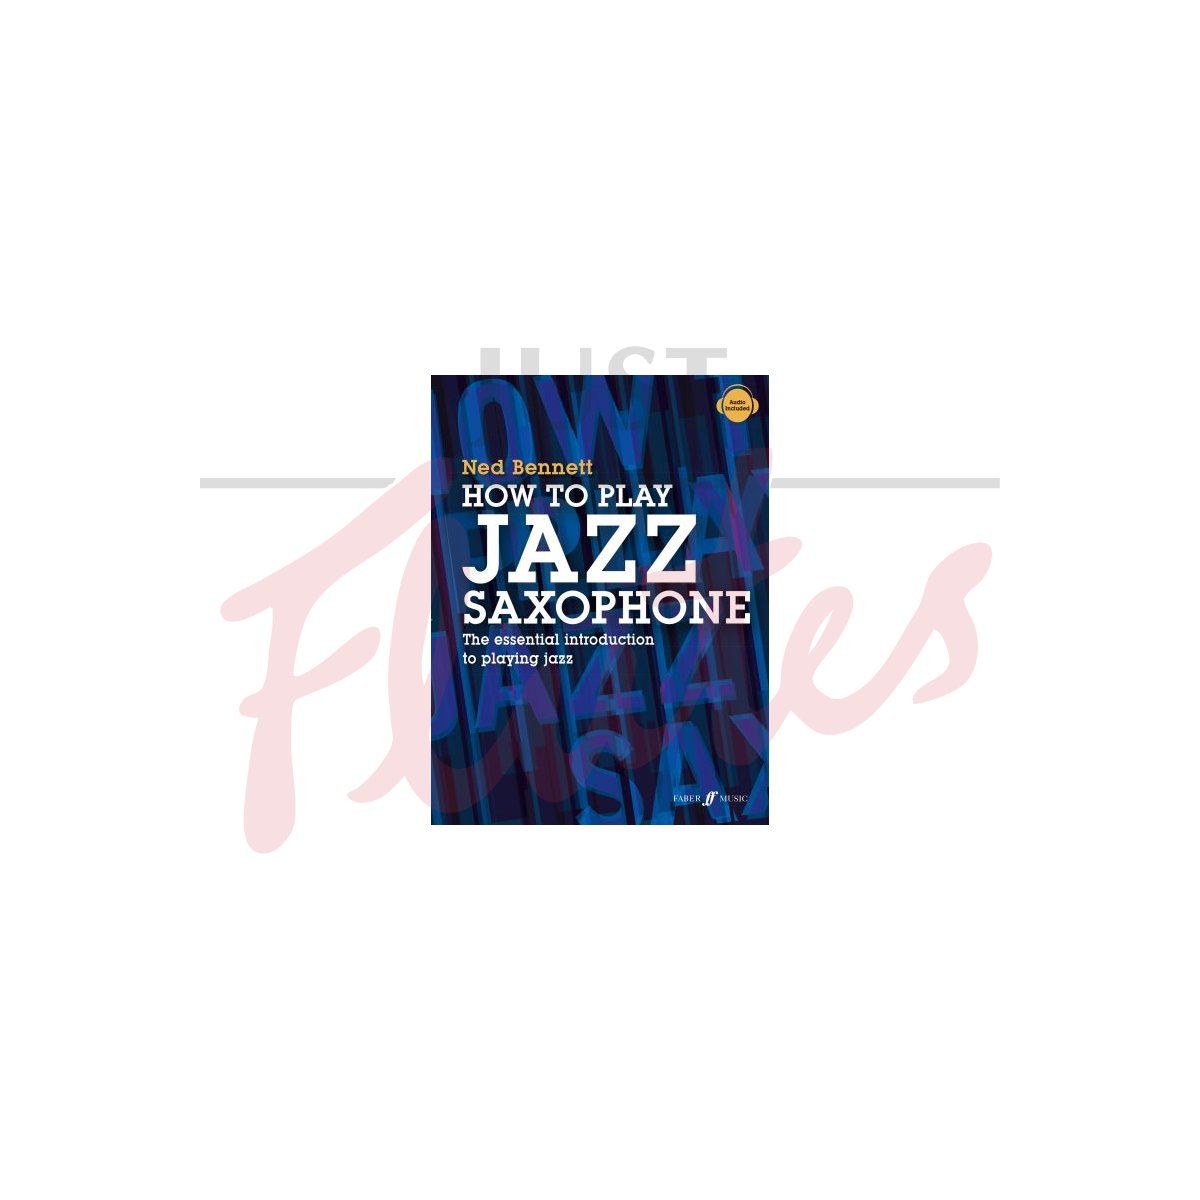  How To Play Jazz Saxophone